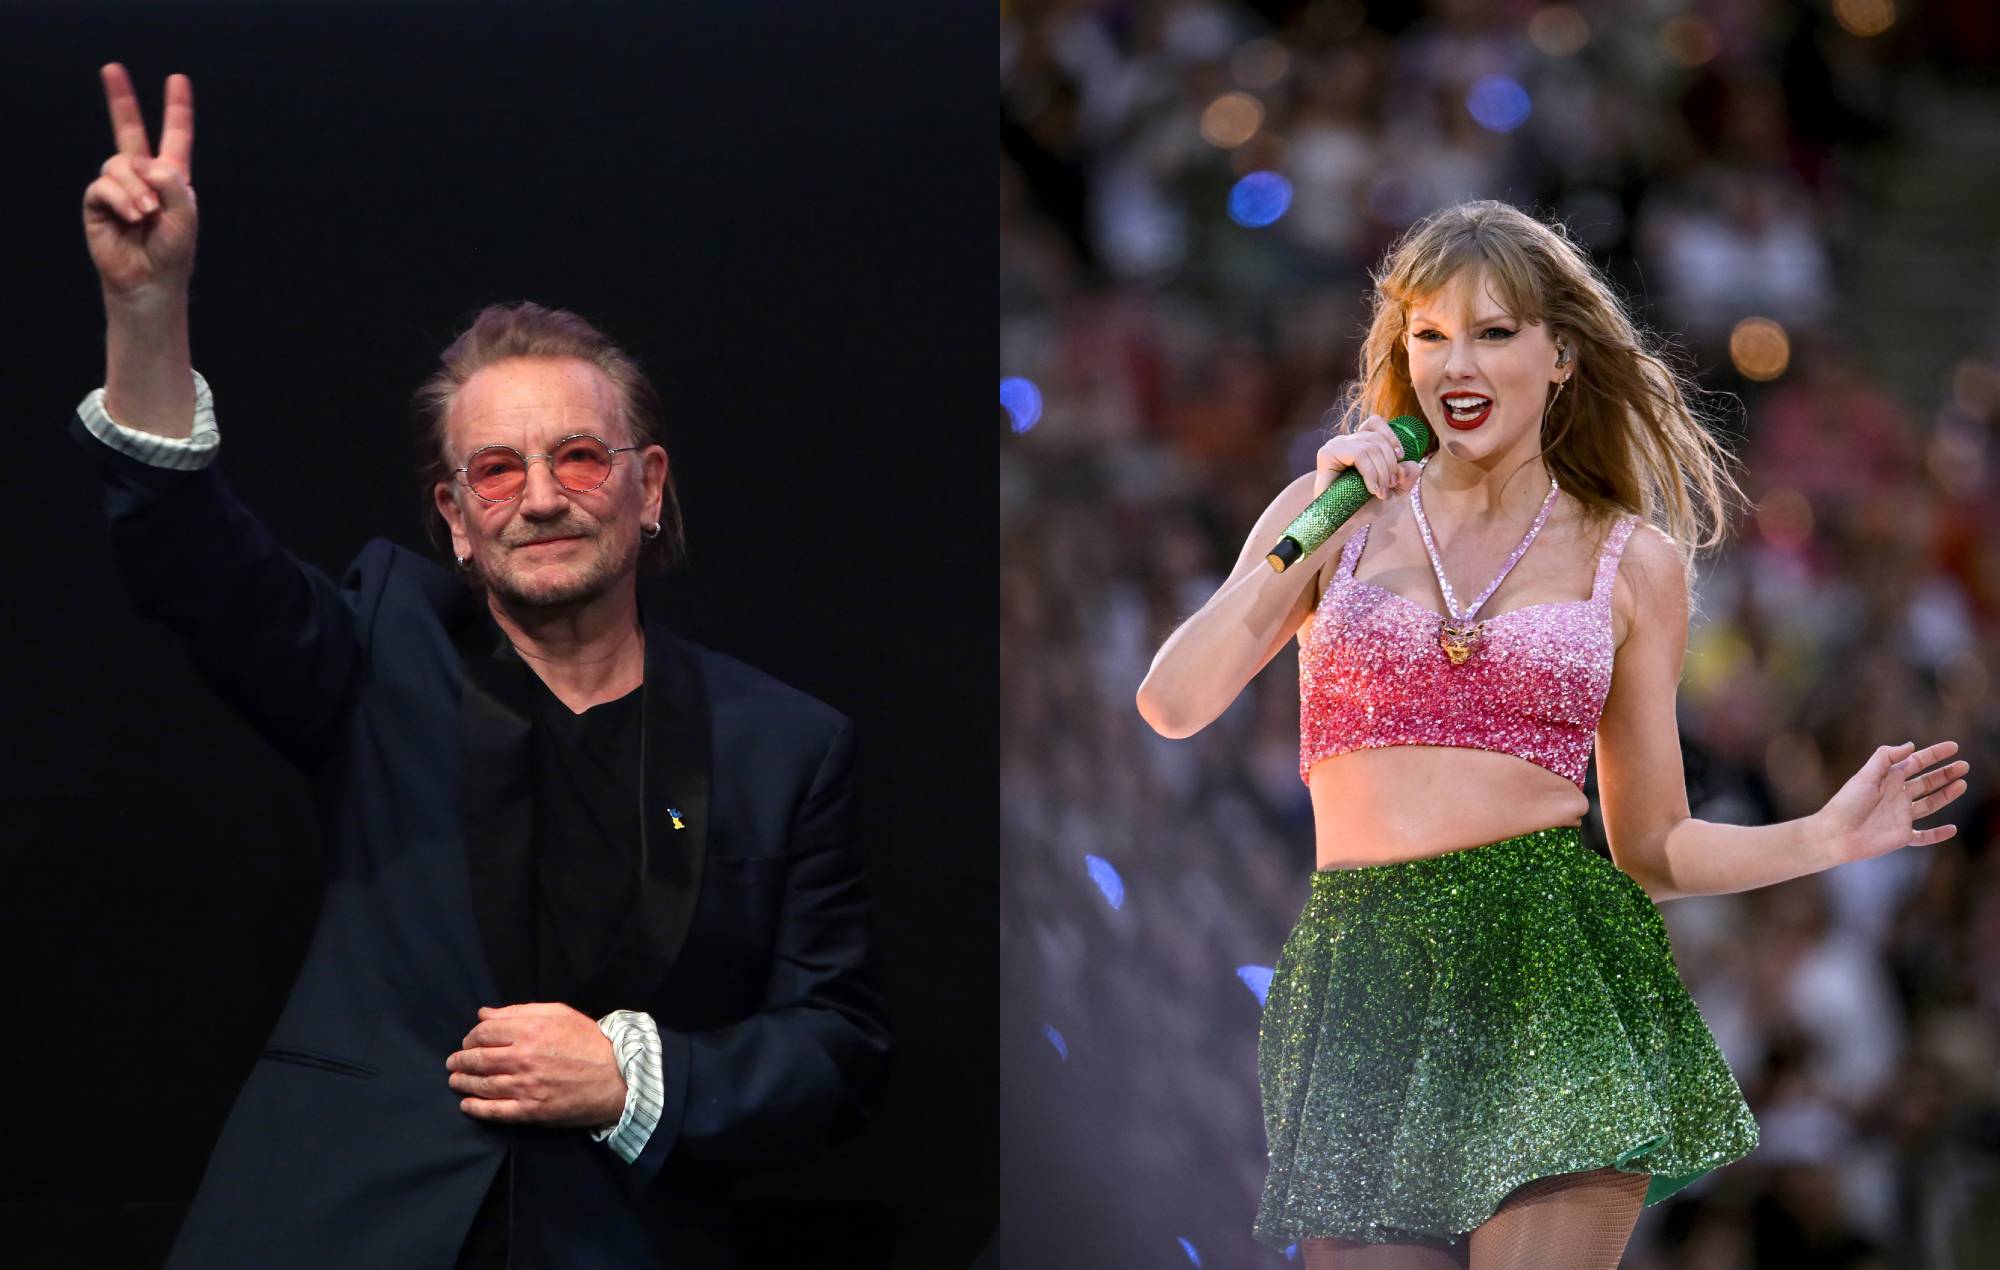 Taylor Swift receives flowers from U2 ahead of ‘Eras’ show in Ireland